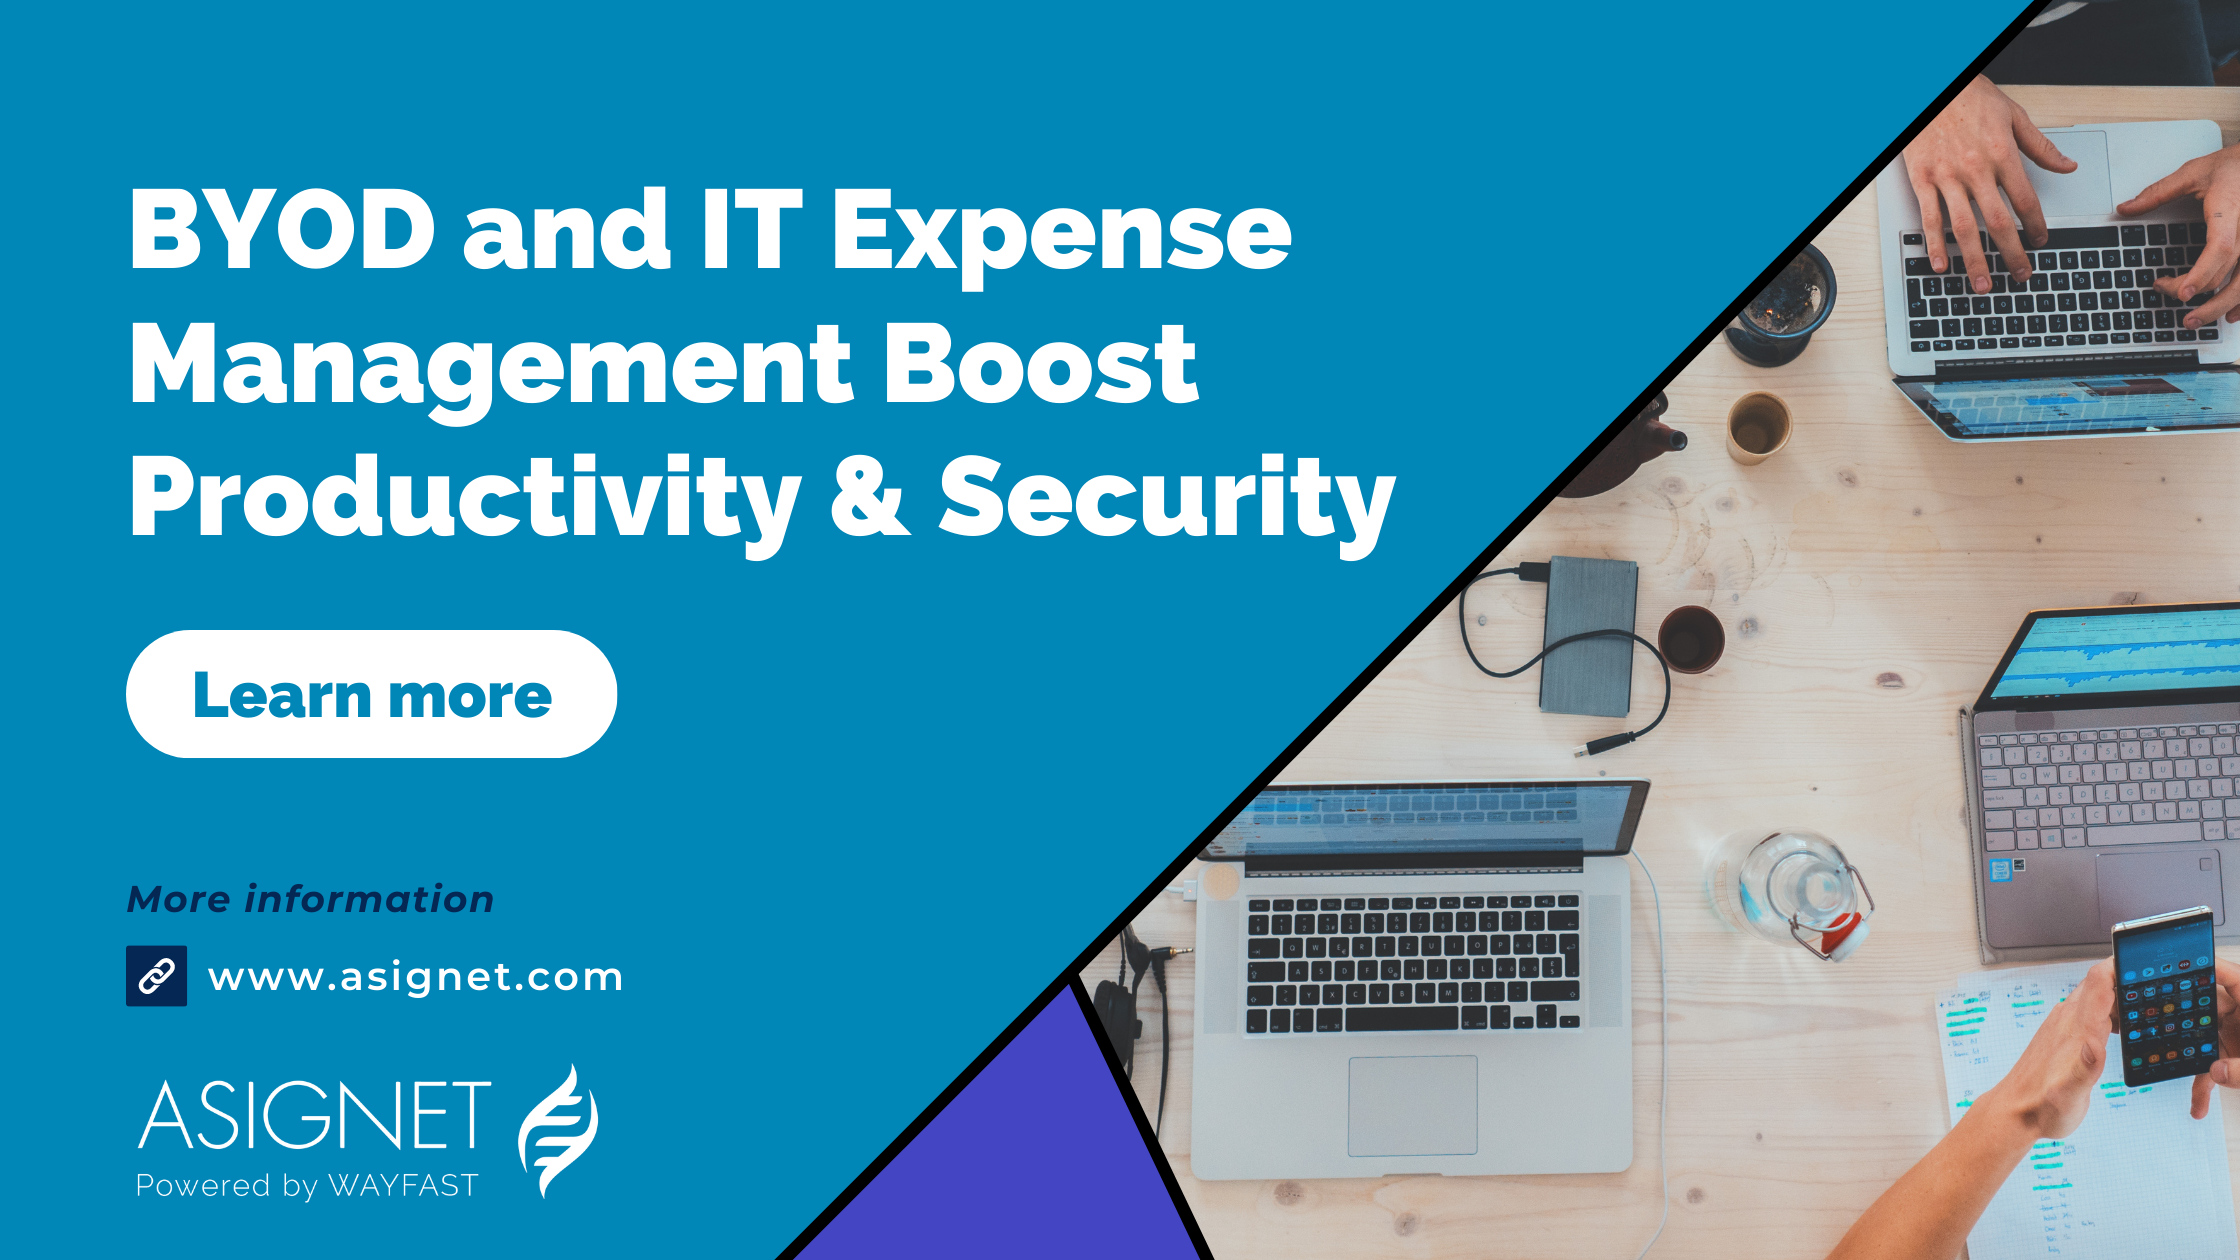 BYOD and IT Expense Management Boost Productivity & Security. Asignet.